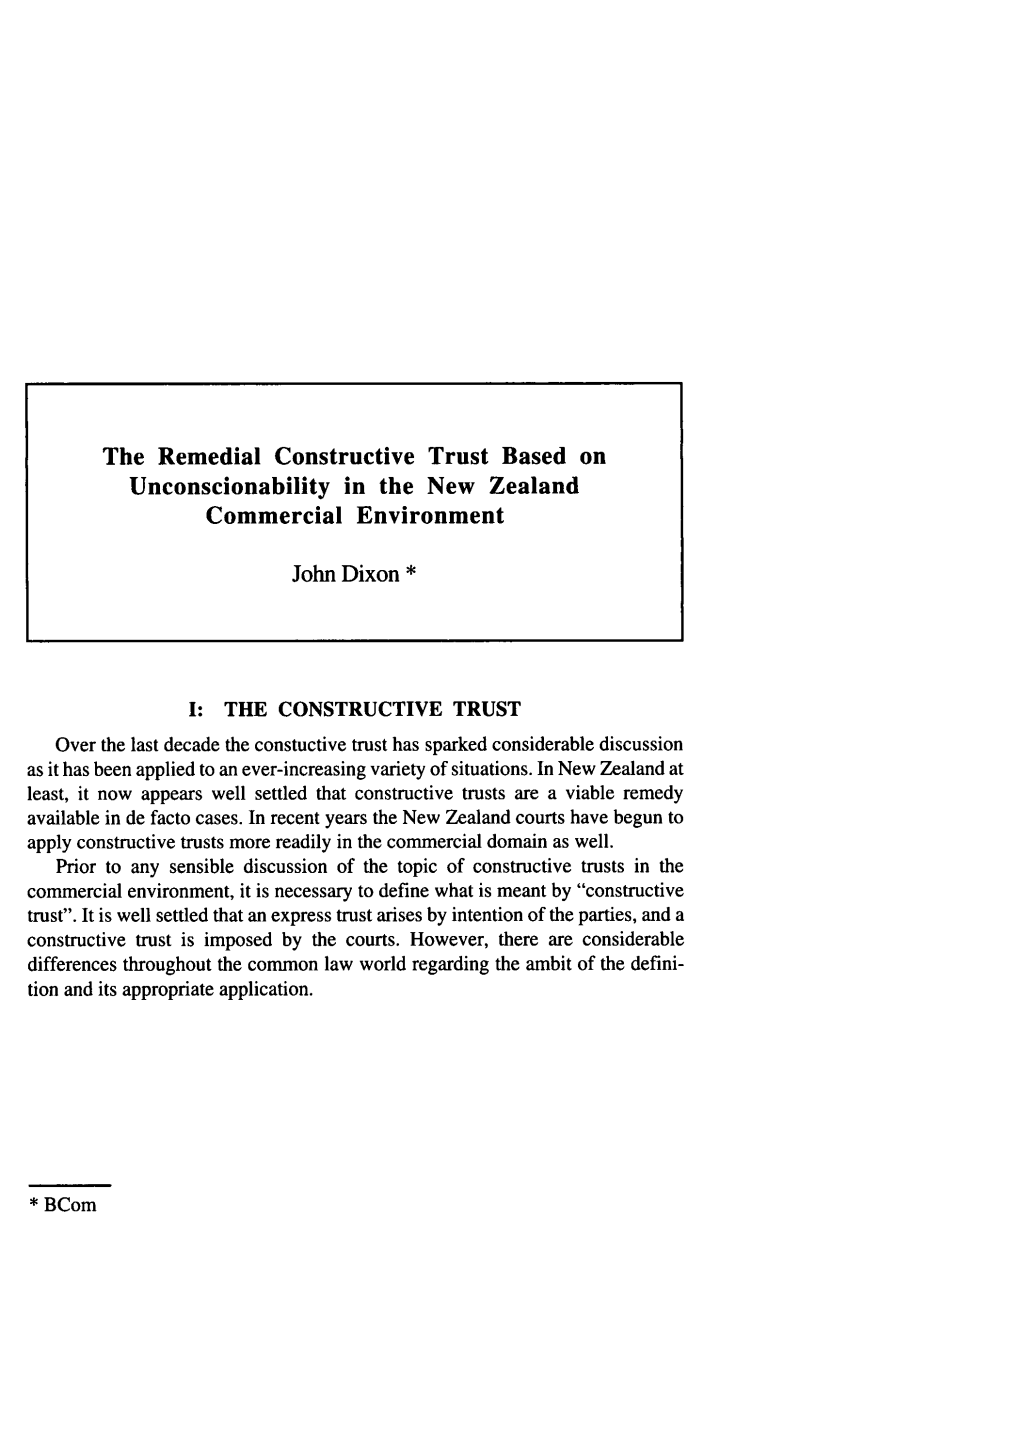 The Remedial Constructive Trust Based on Unconscionability in the New Zealand Commercial Environment